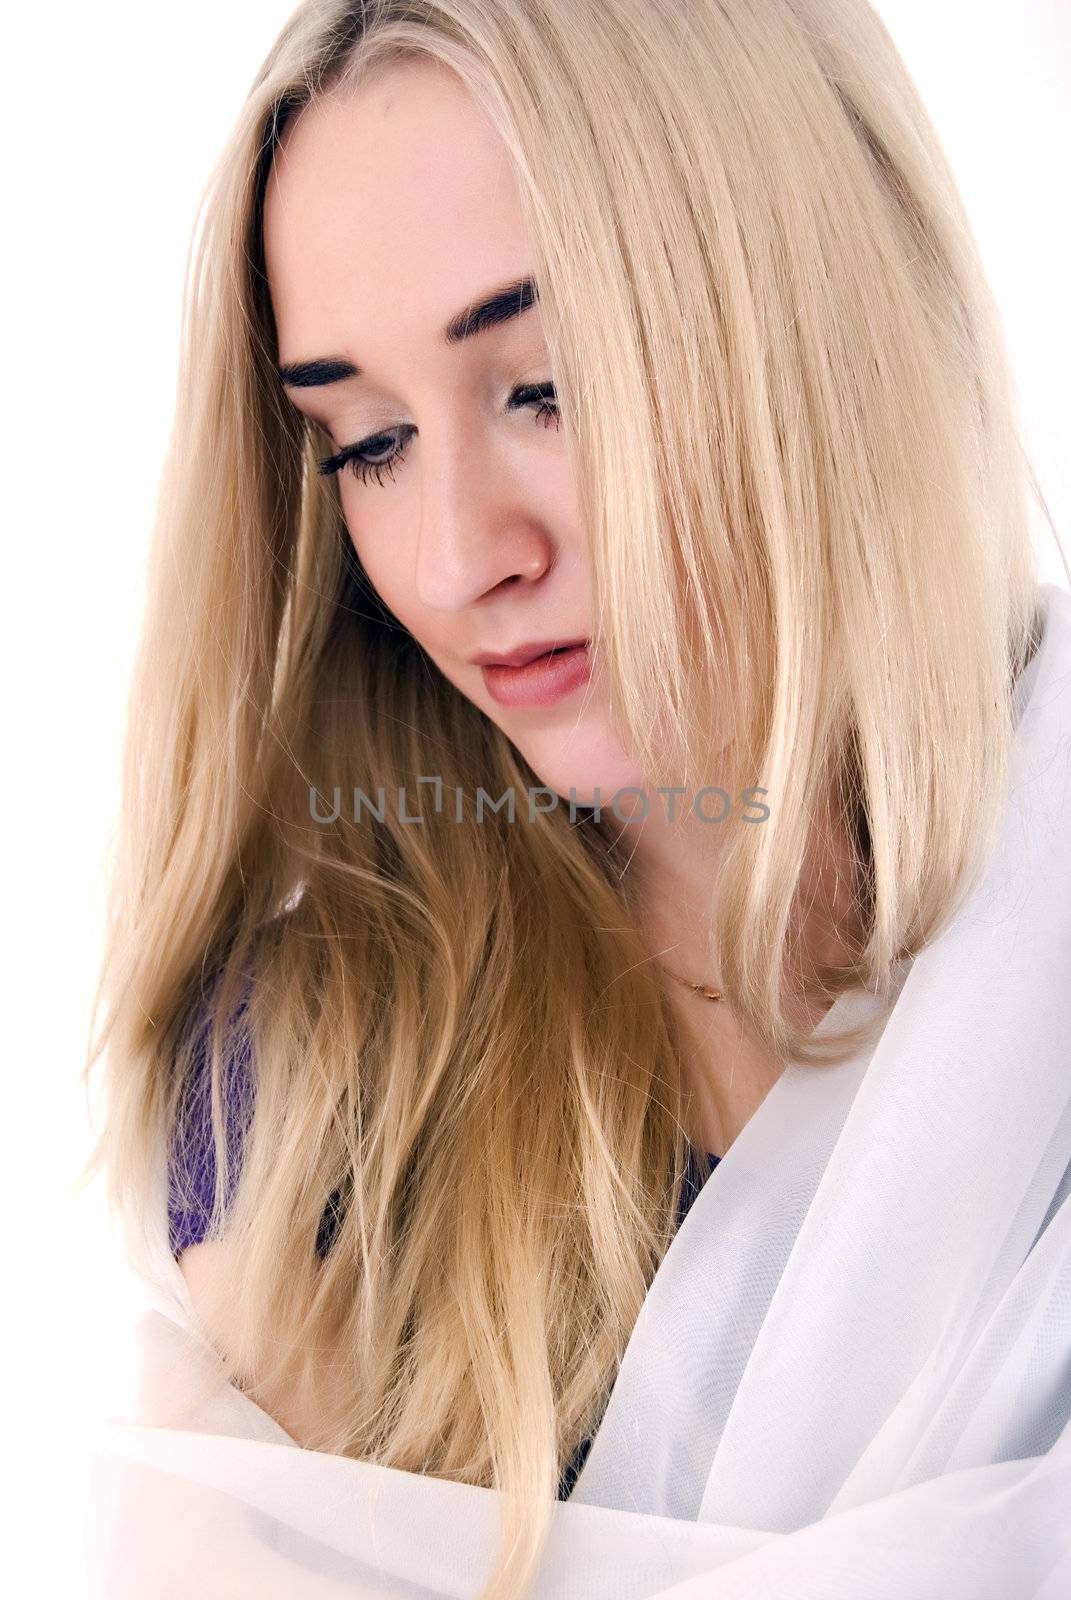 Portrait of a young beautiful blonde looking sad